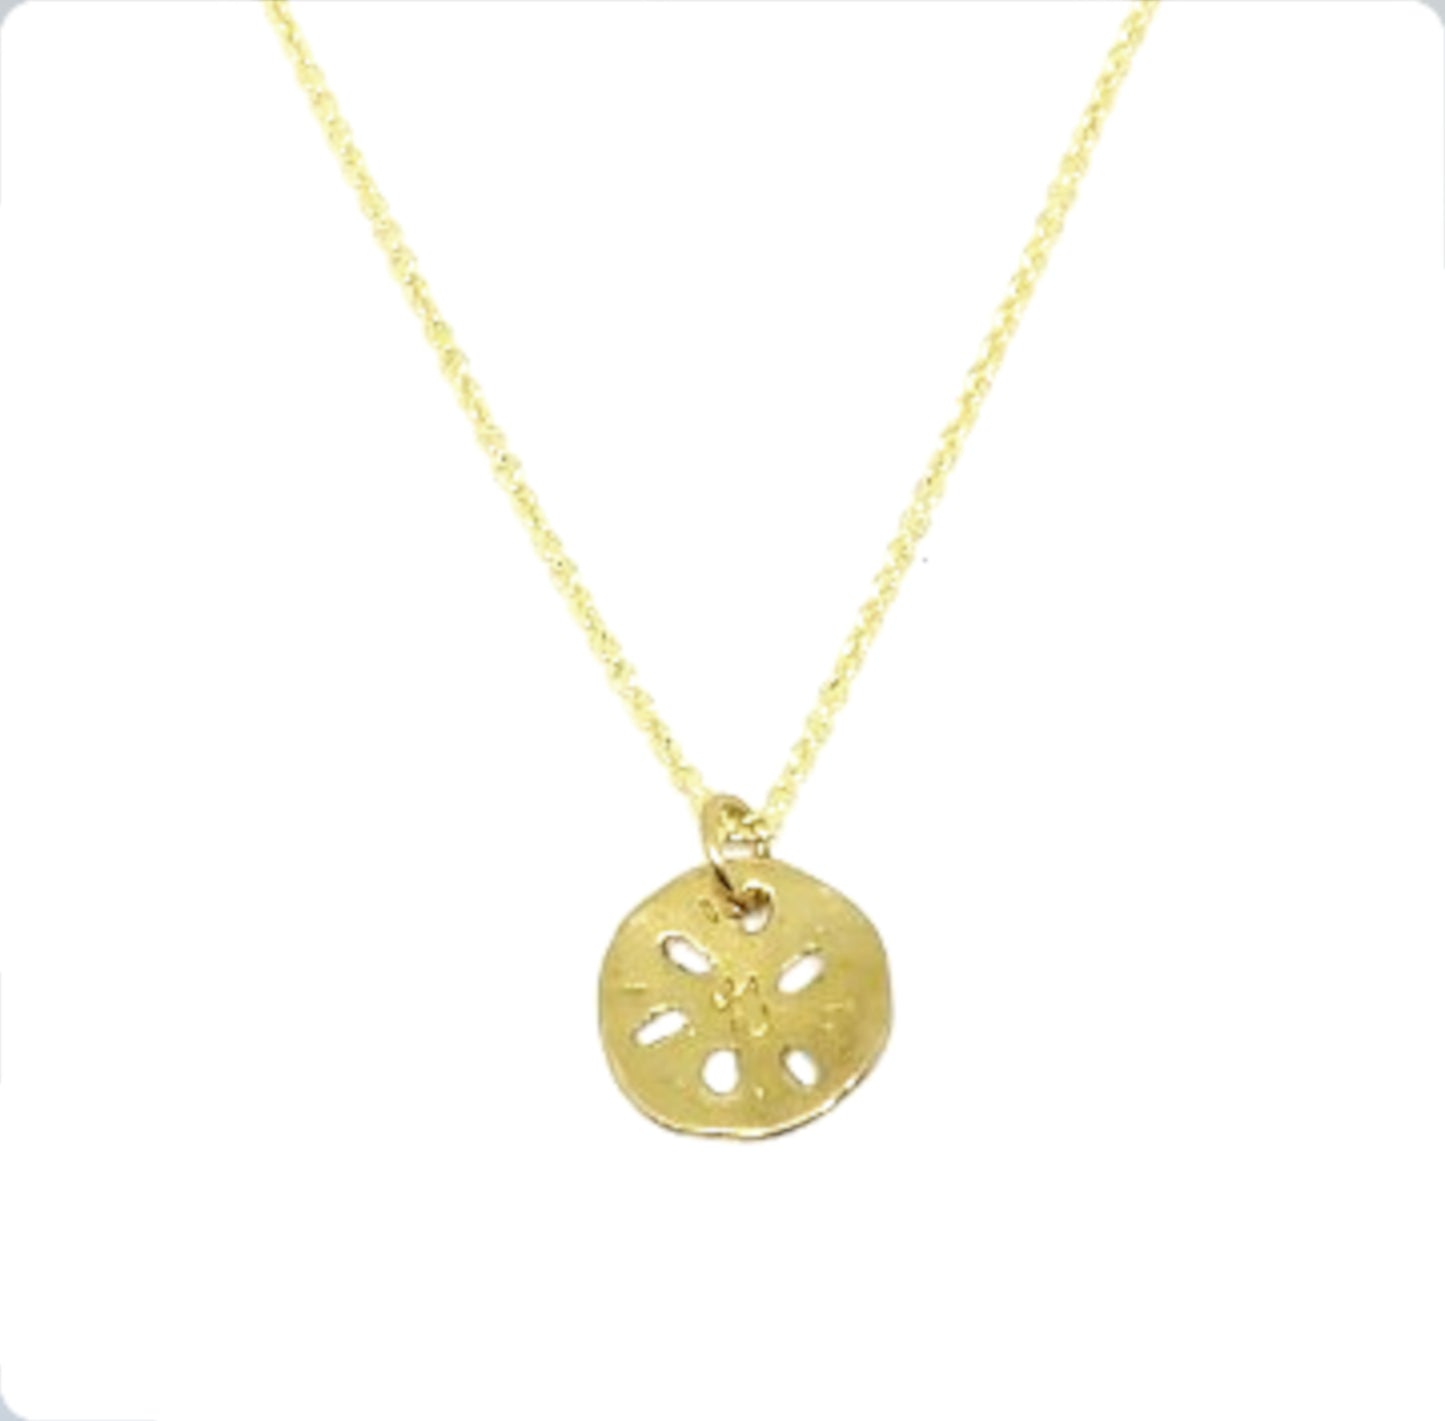 Lotus Root Pendant Necklace in 18K Yellow Gold Plated Sterling Silver